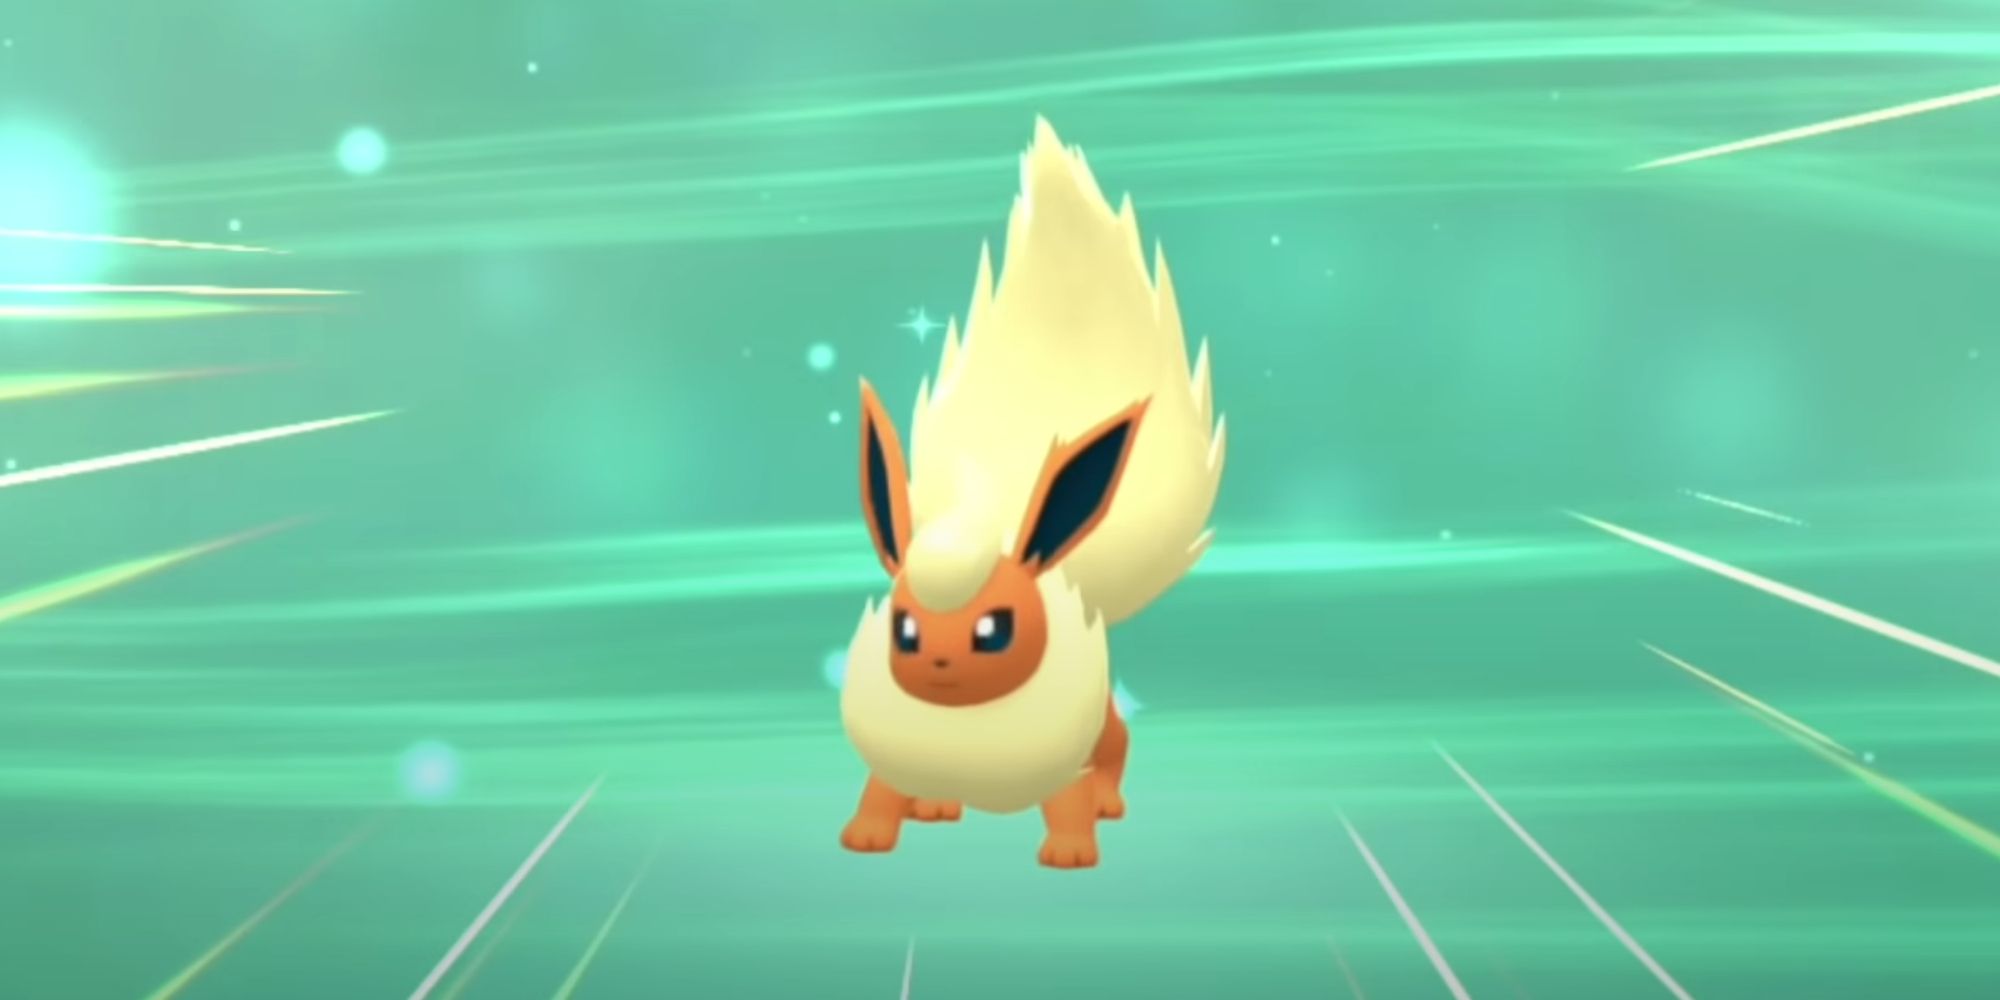 Flareon evolves when trainers use a Fire Stone on Eevee in Pokemon Brilliant Diamond and Shining Pearl.